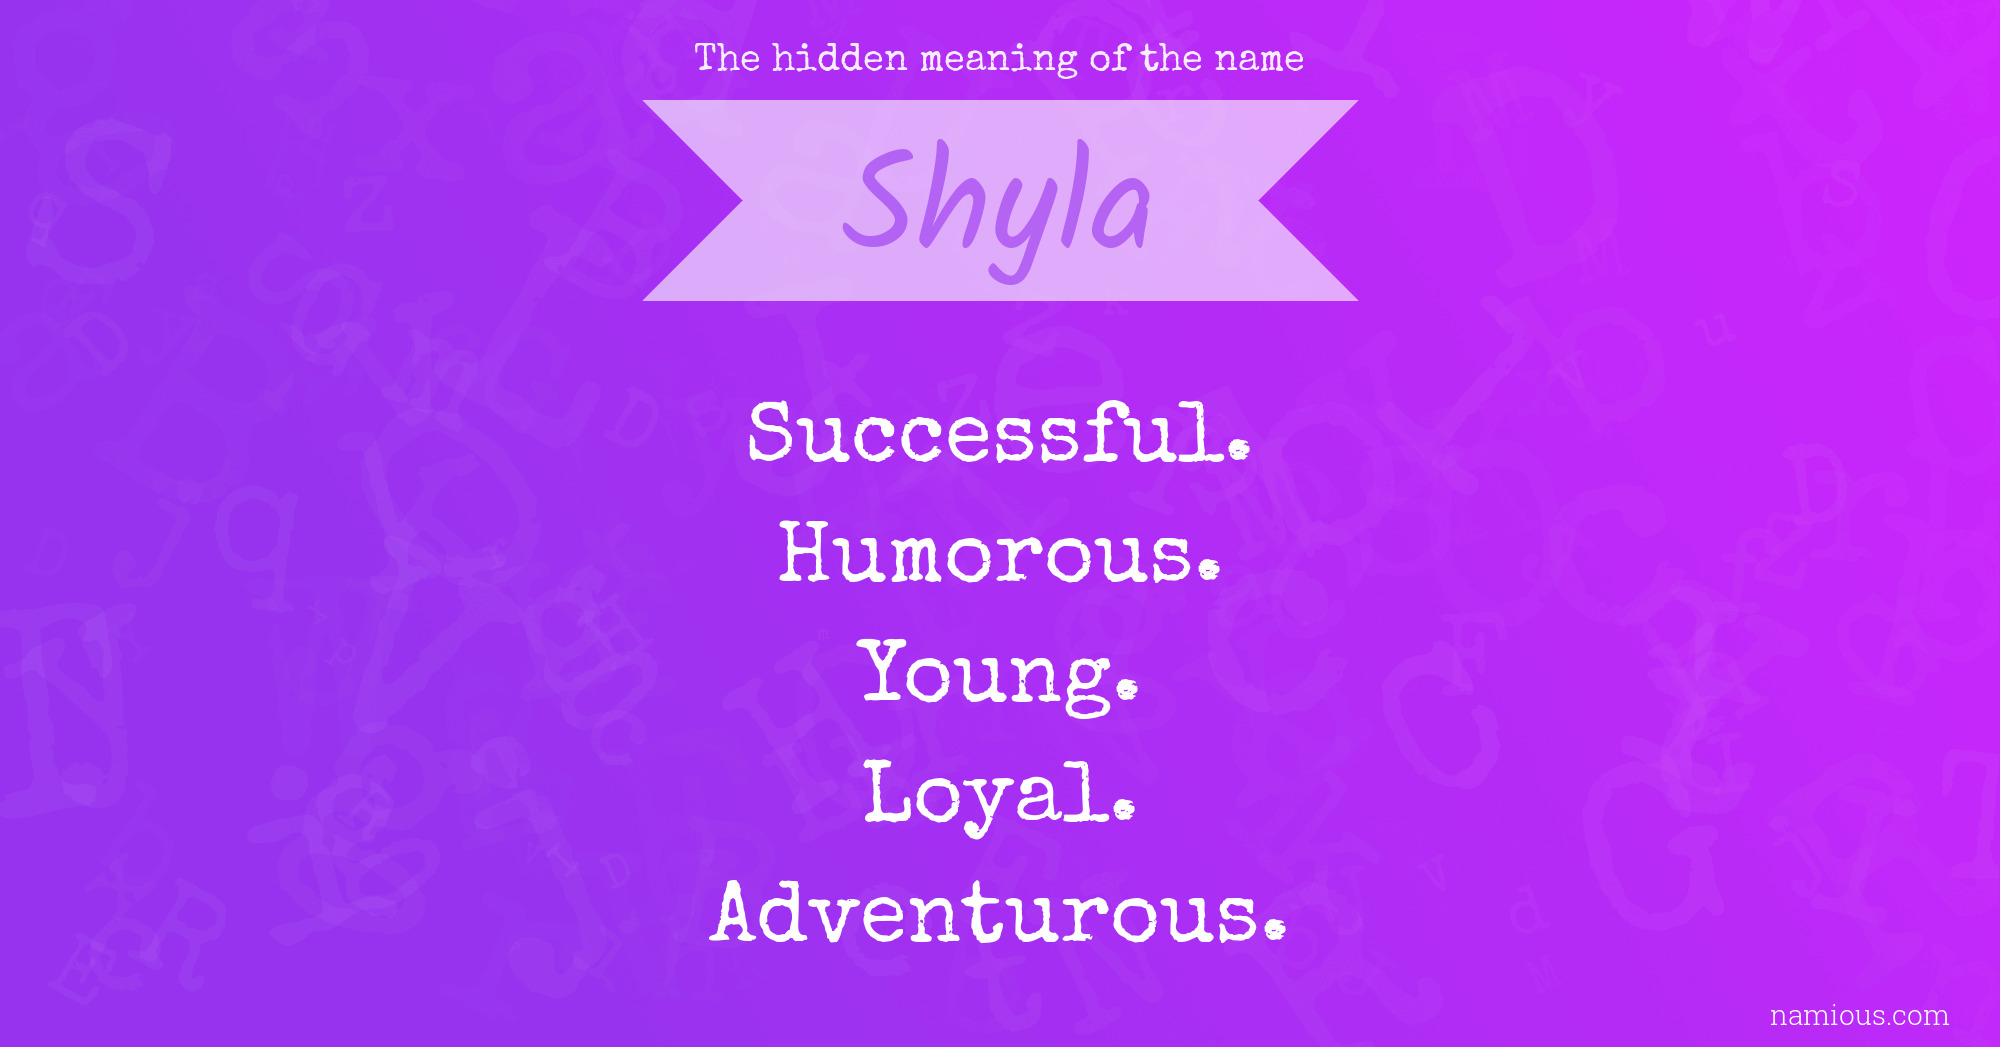 The hidden meaning of the name Shyla